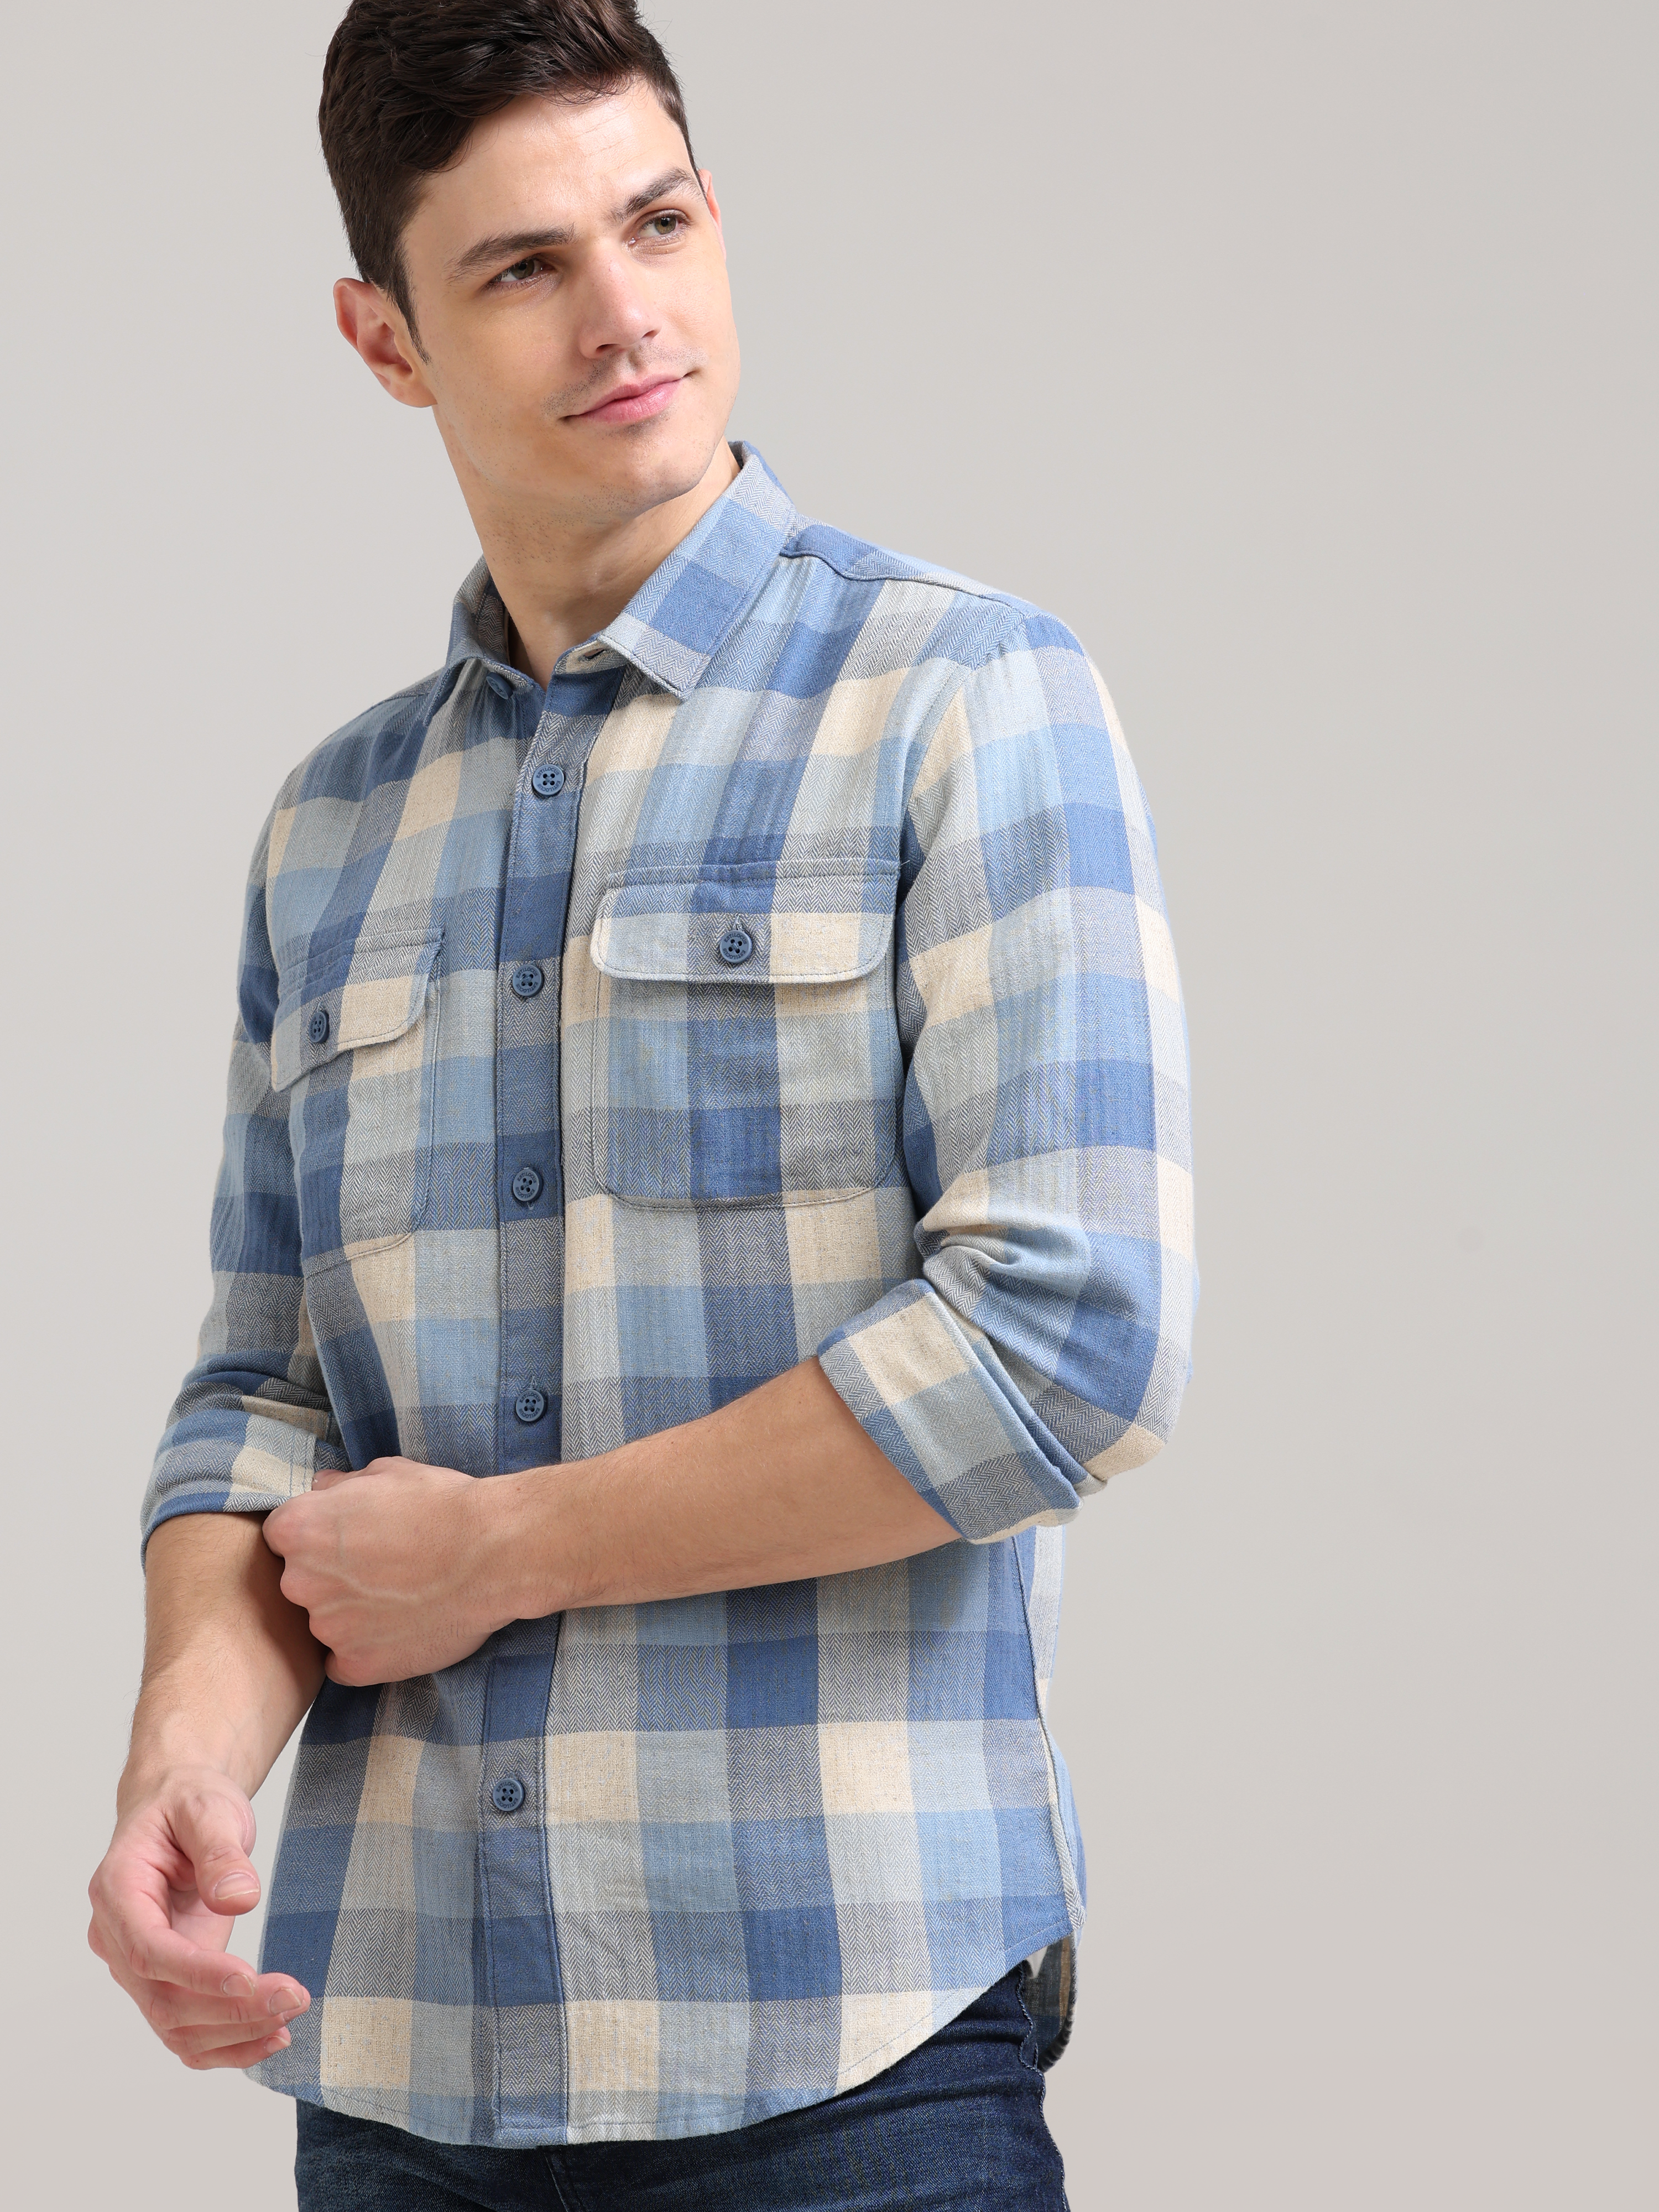 Blue Nova Cream Casual Check Shirt shop online at Estilocus. 100% Cotton • Full-sleeve check shirt• Cut and sew placket• Regular collar• Double button edge cuff• Double pocket with flap• Curved bottom hemline .• All double needle construction, finest qual